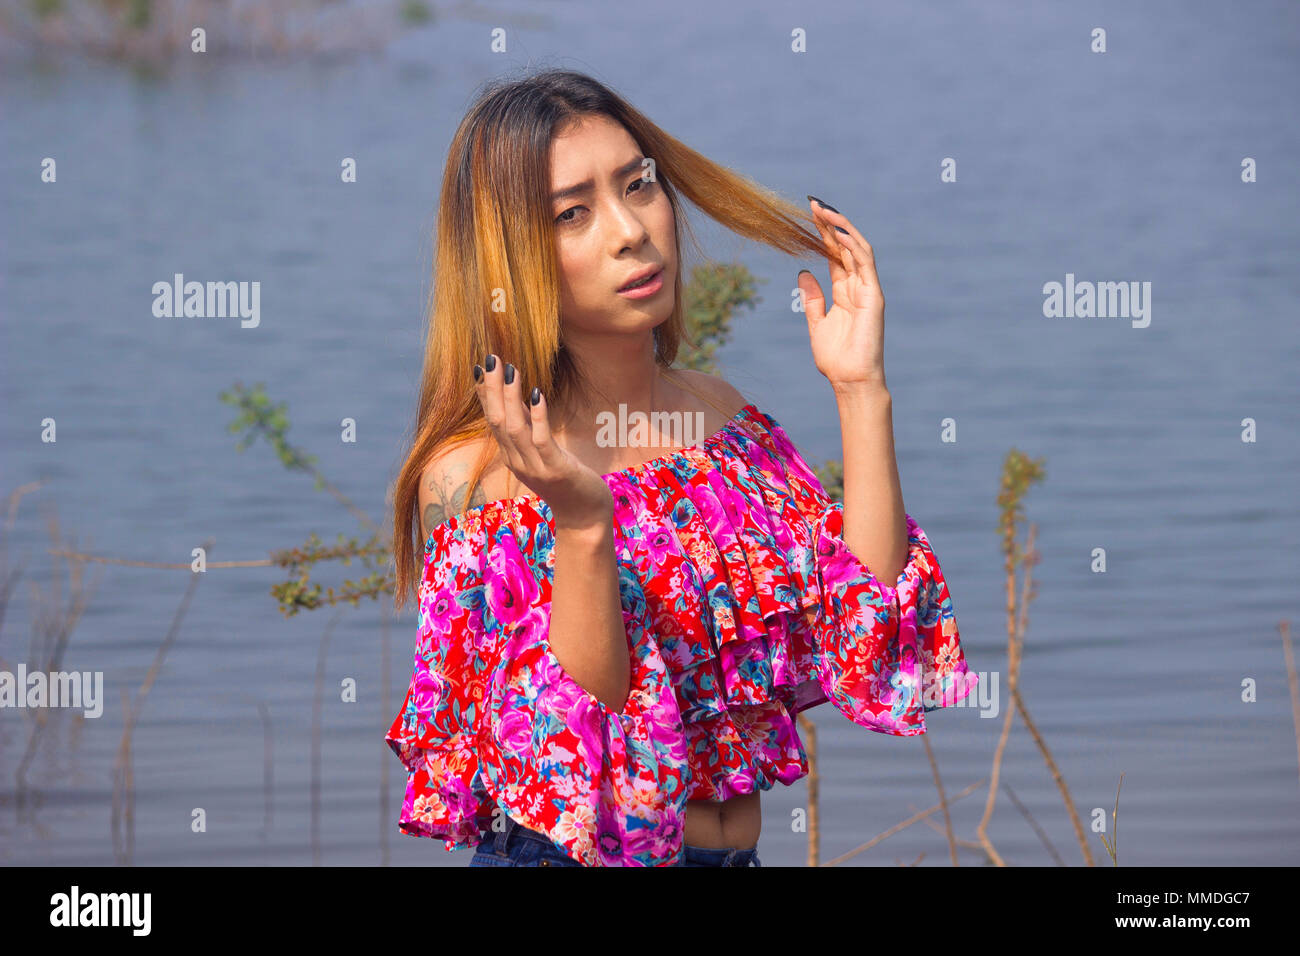 Stylish woman in floral top with raised hands Stock Photo